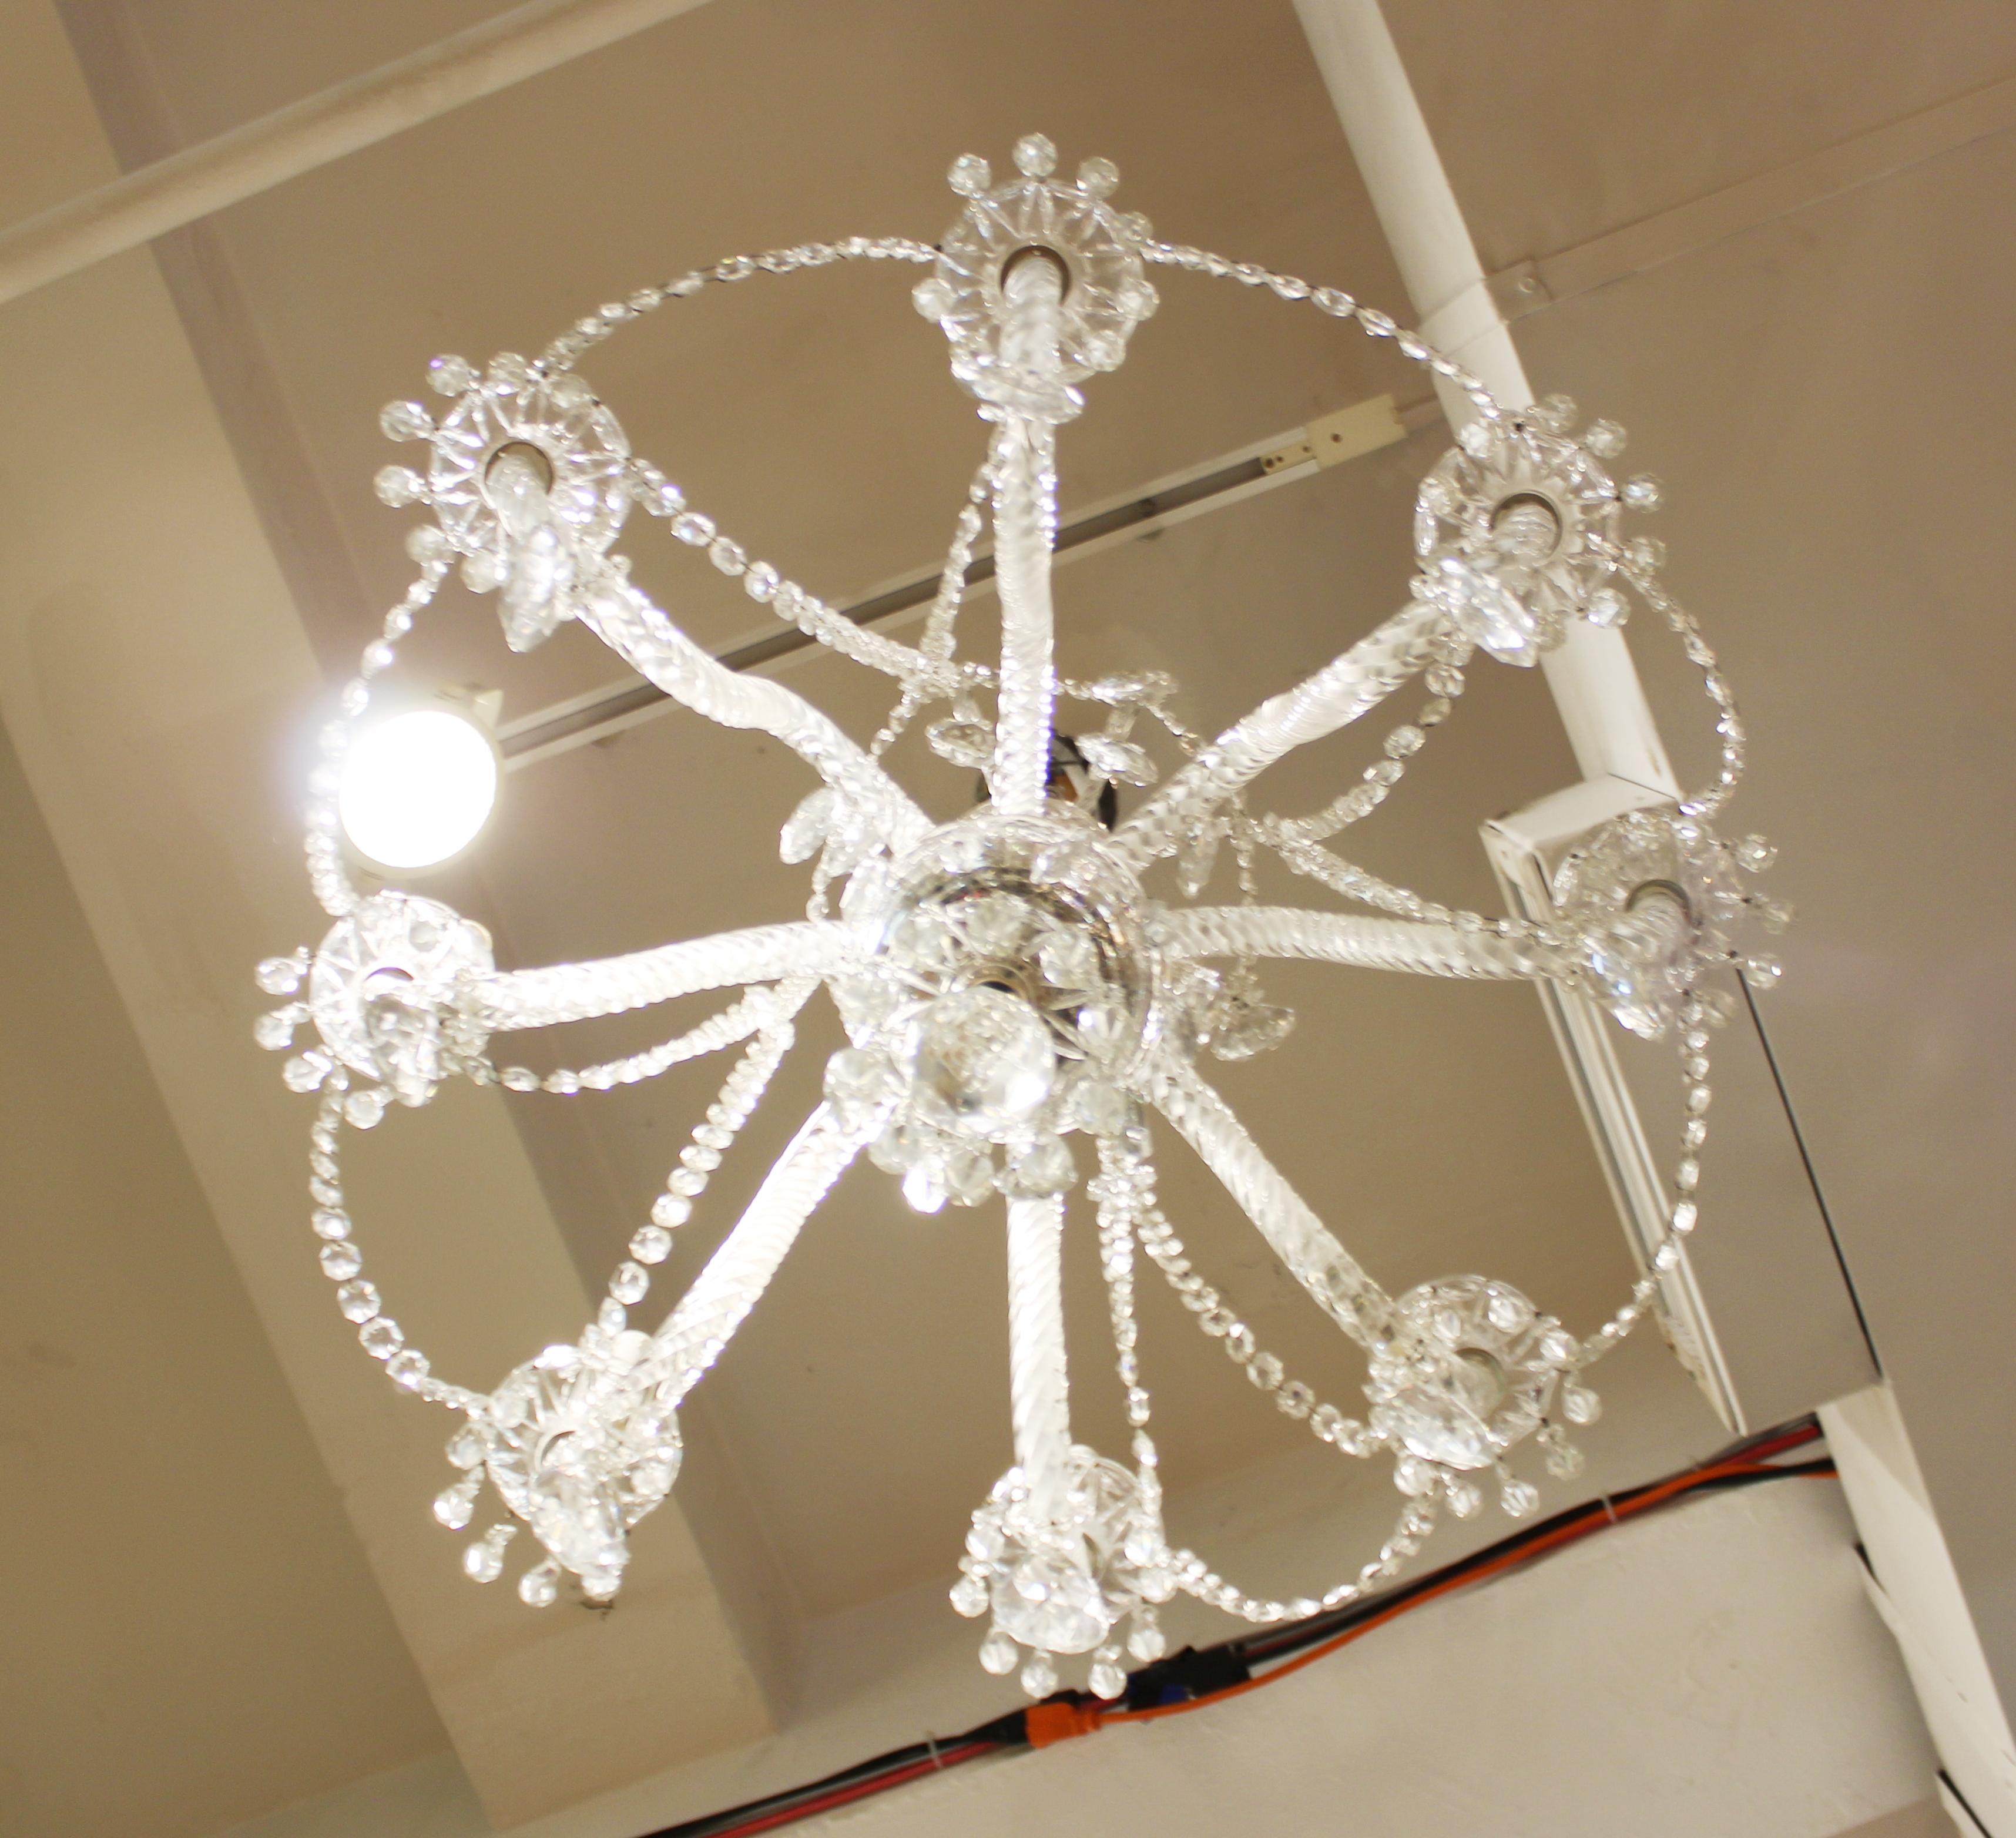 Martinez y Ortz Neoclassical Style Crystal Chandelier For Sale 2